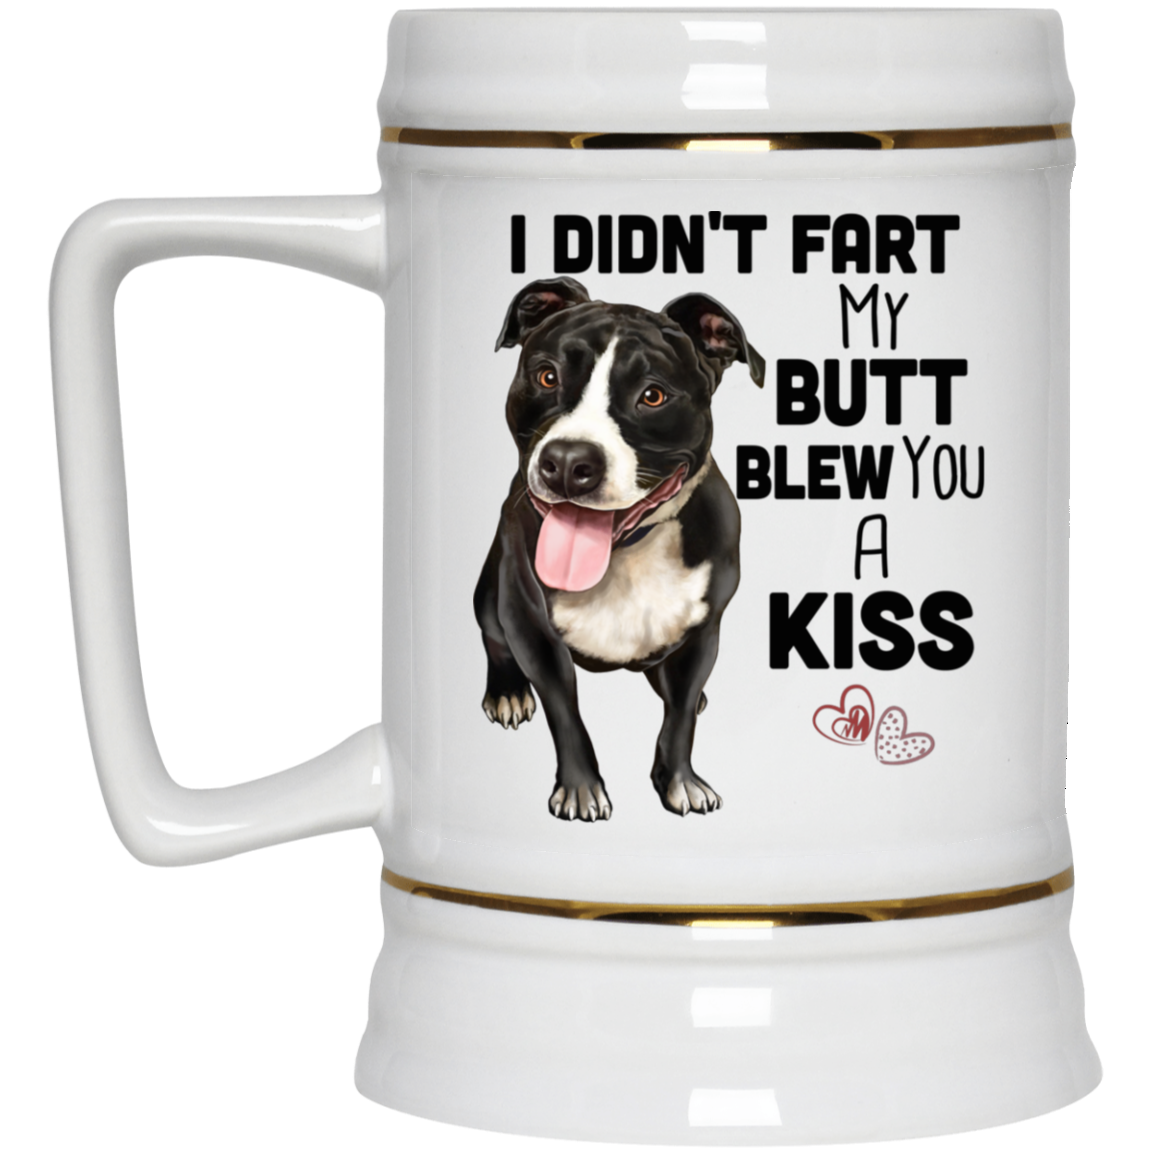 Pit Bull Gifts, Pit Bull Mug - I Didn't Fart My Butt Blew You A Kiss - GoneBold.gift